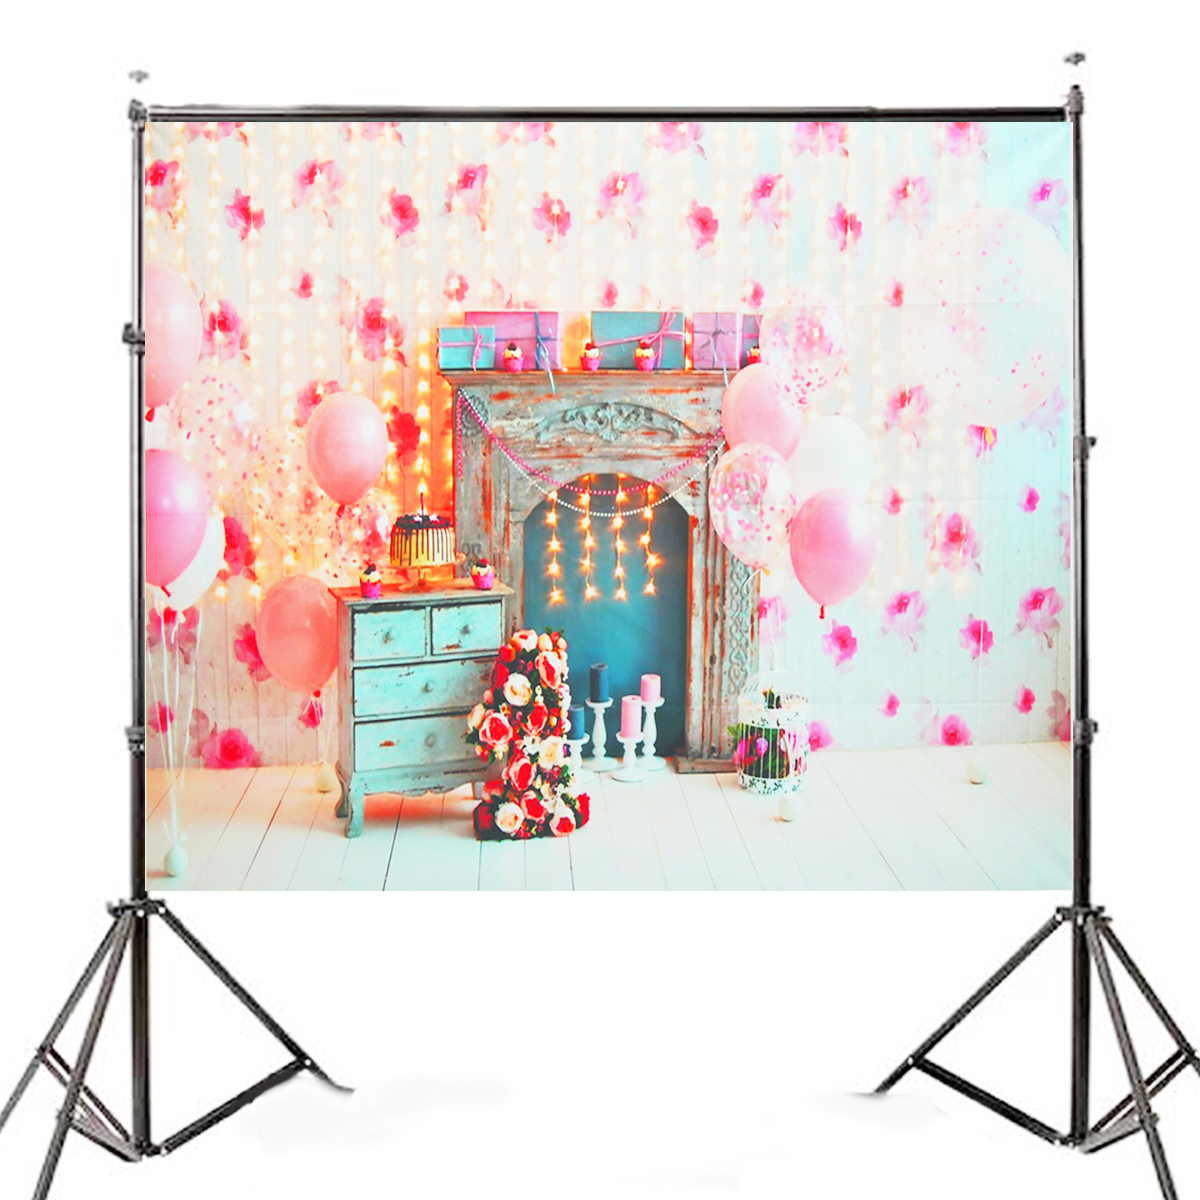 

5x3ft Pink Balloon Fireplace Cabinet Photography Backdrop Studio Prop Background